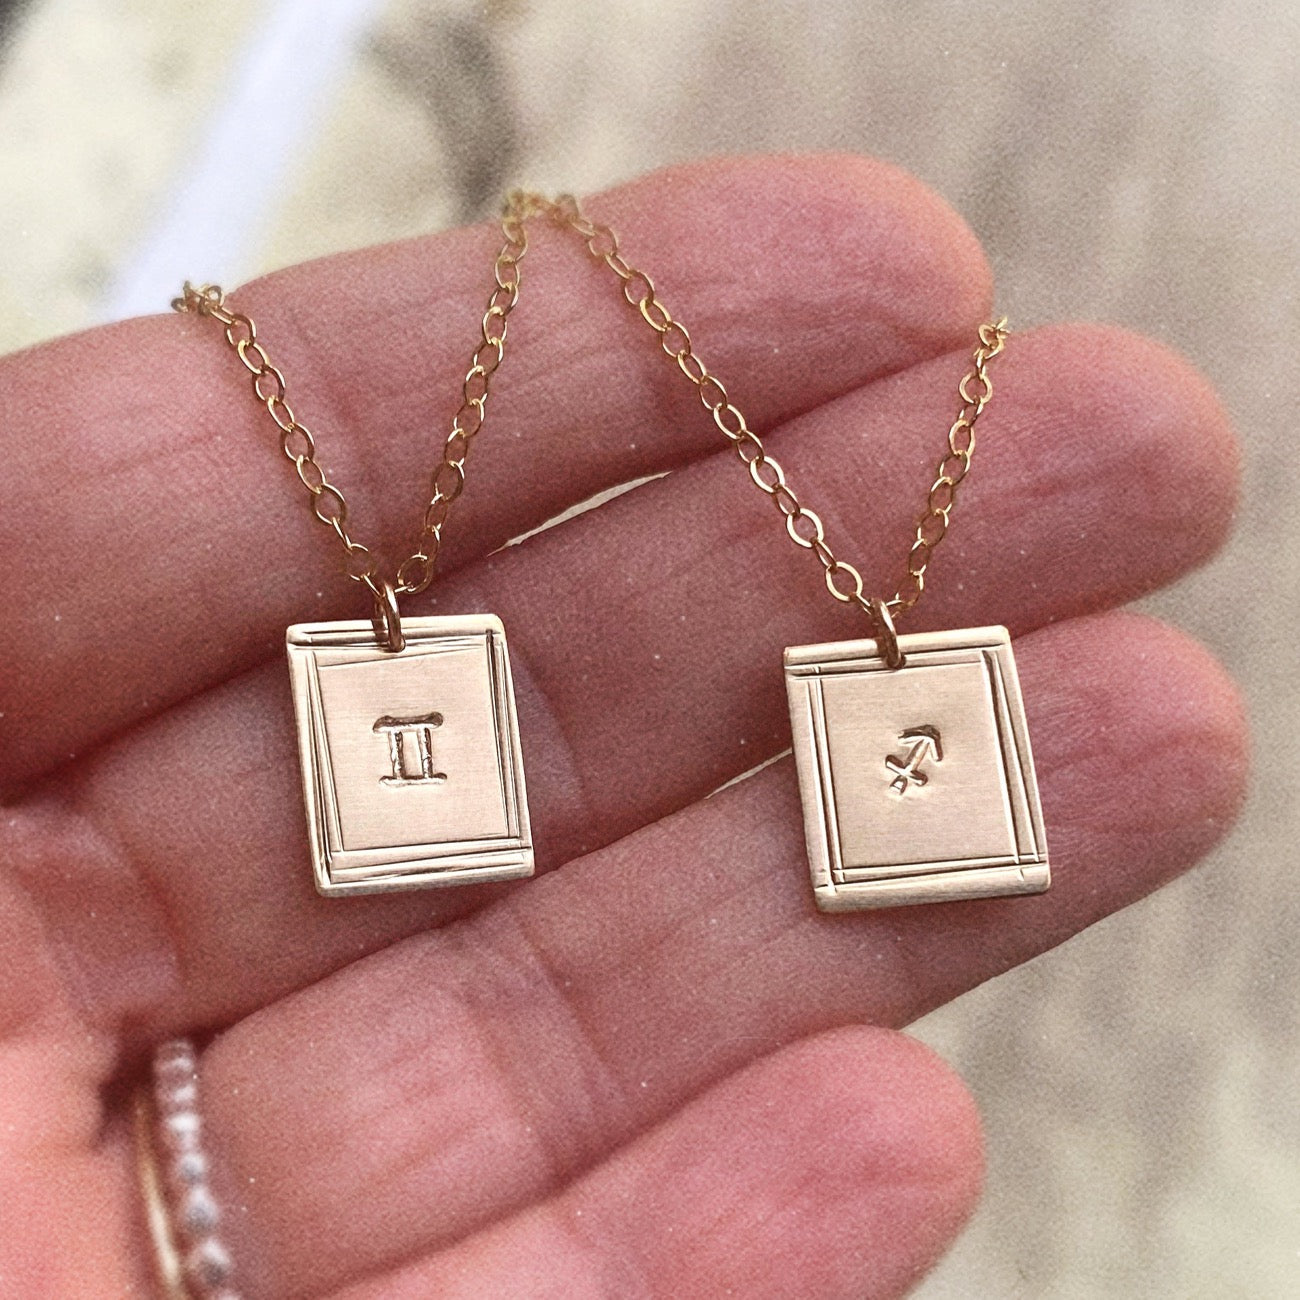 dainty gold personalized horoscope necklaces